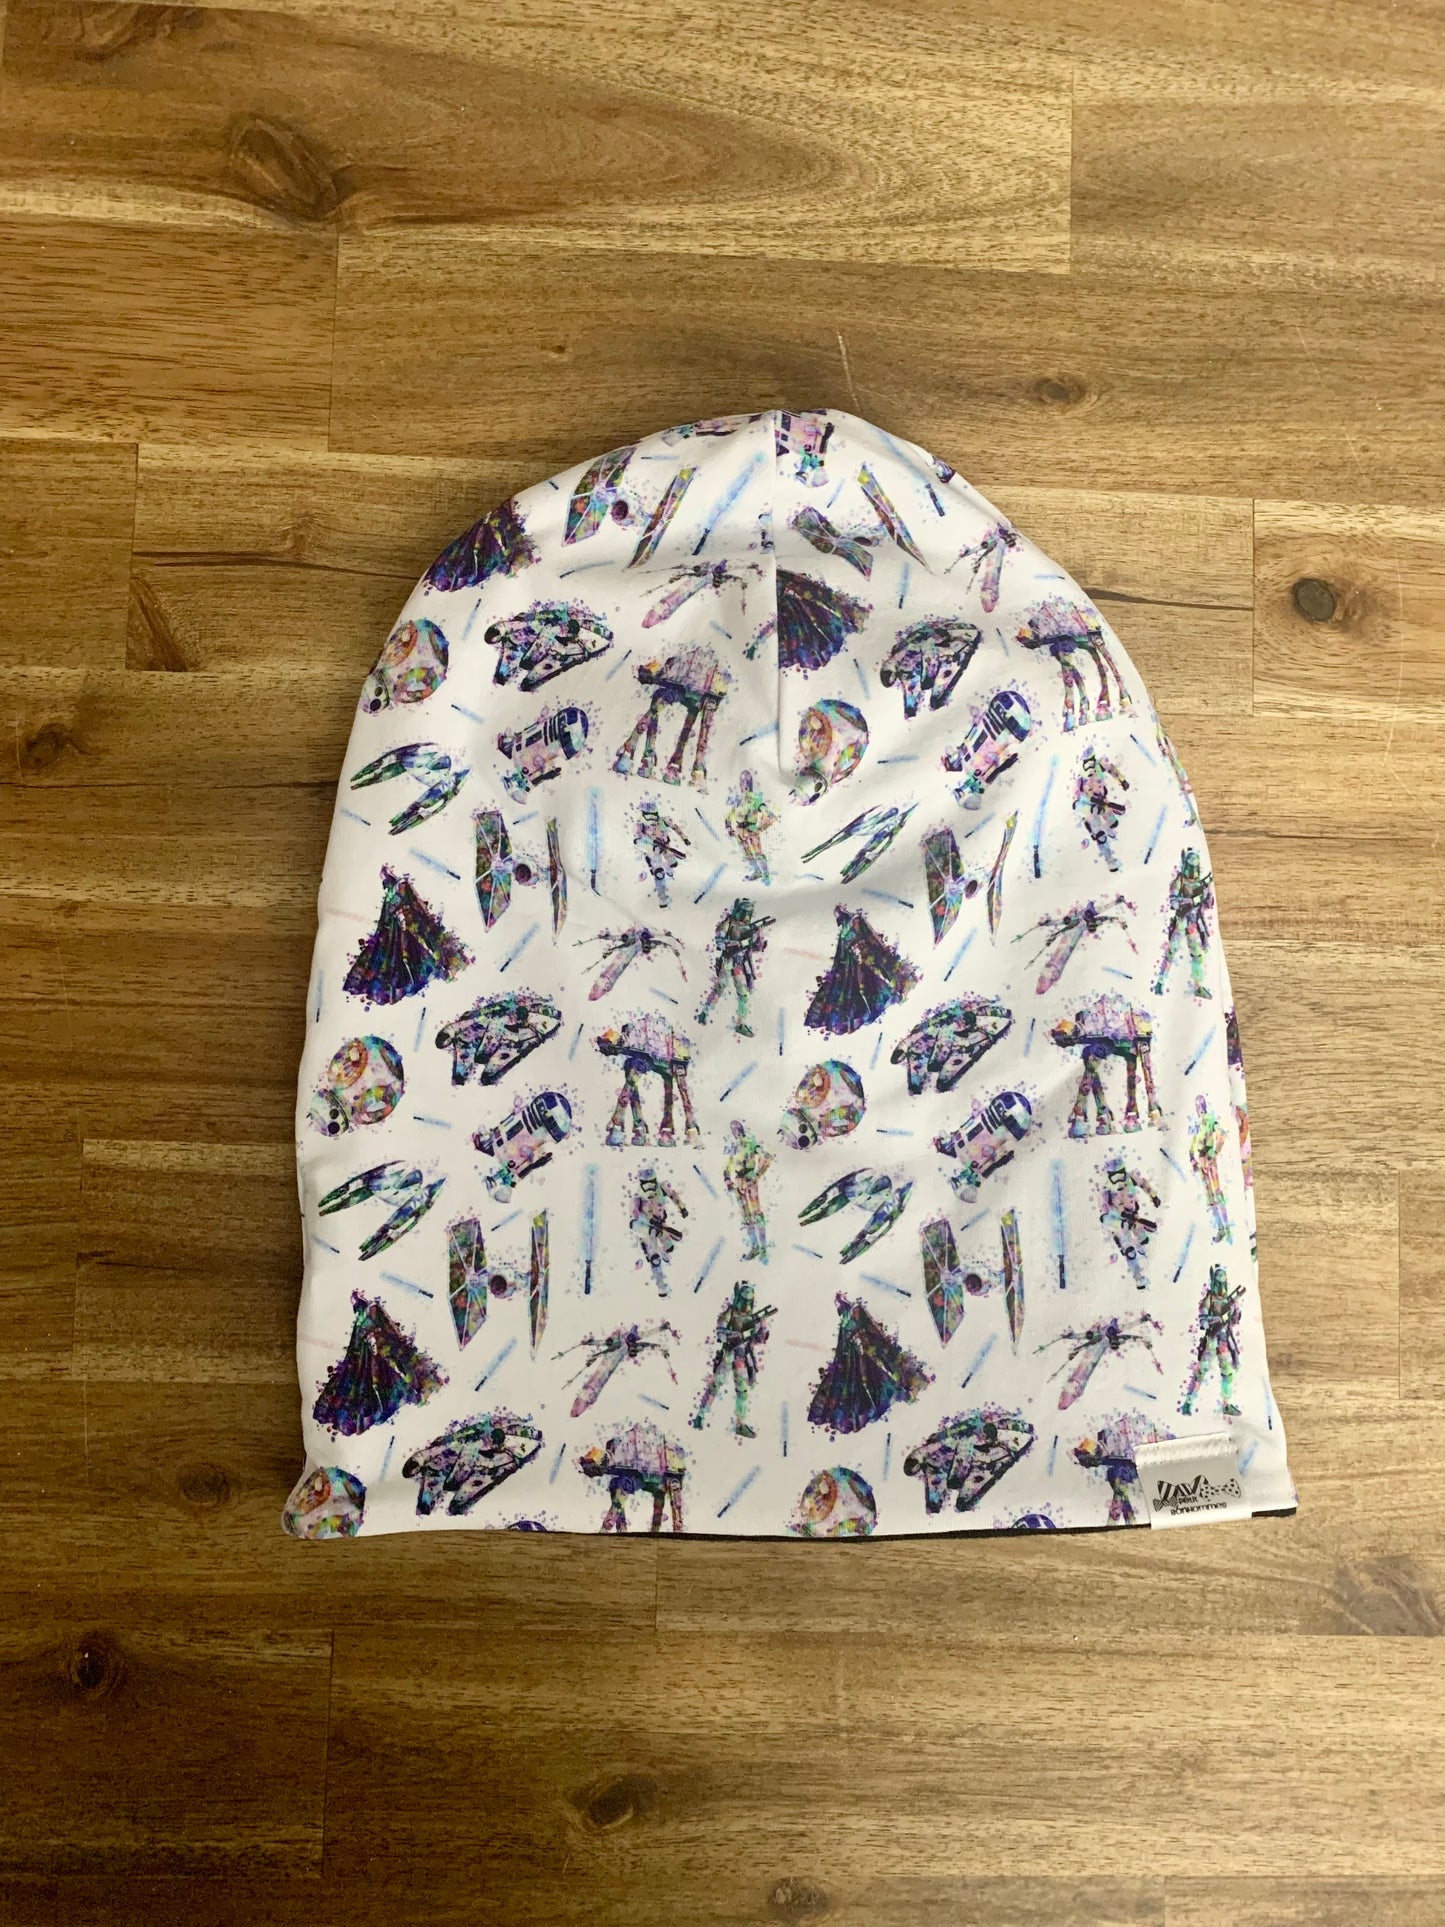 Slouchy Toque - Watercolour Star Wars